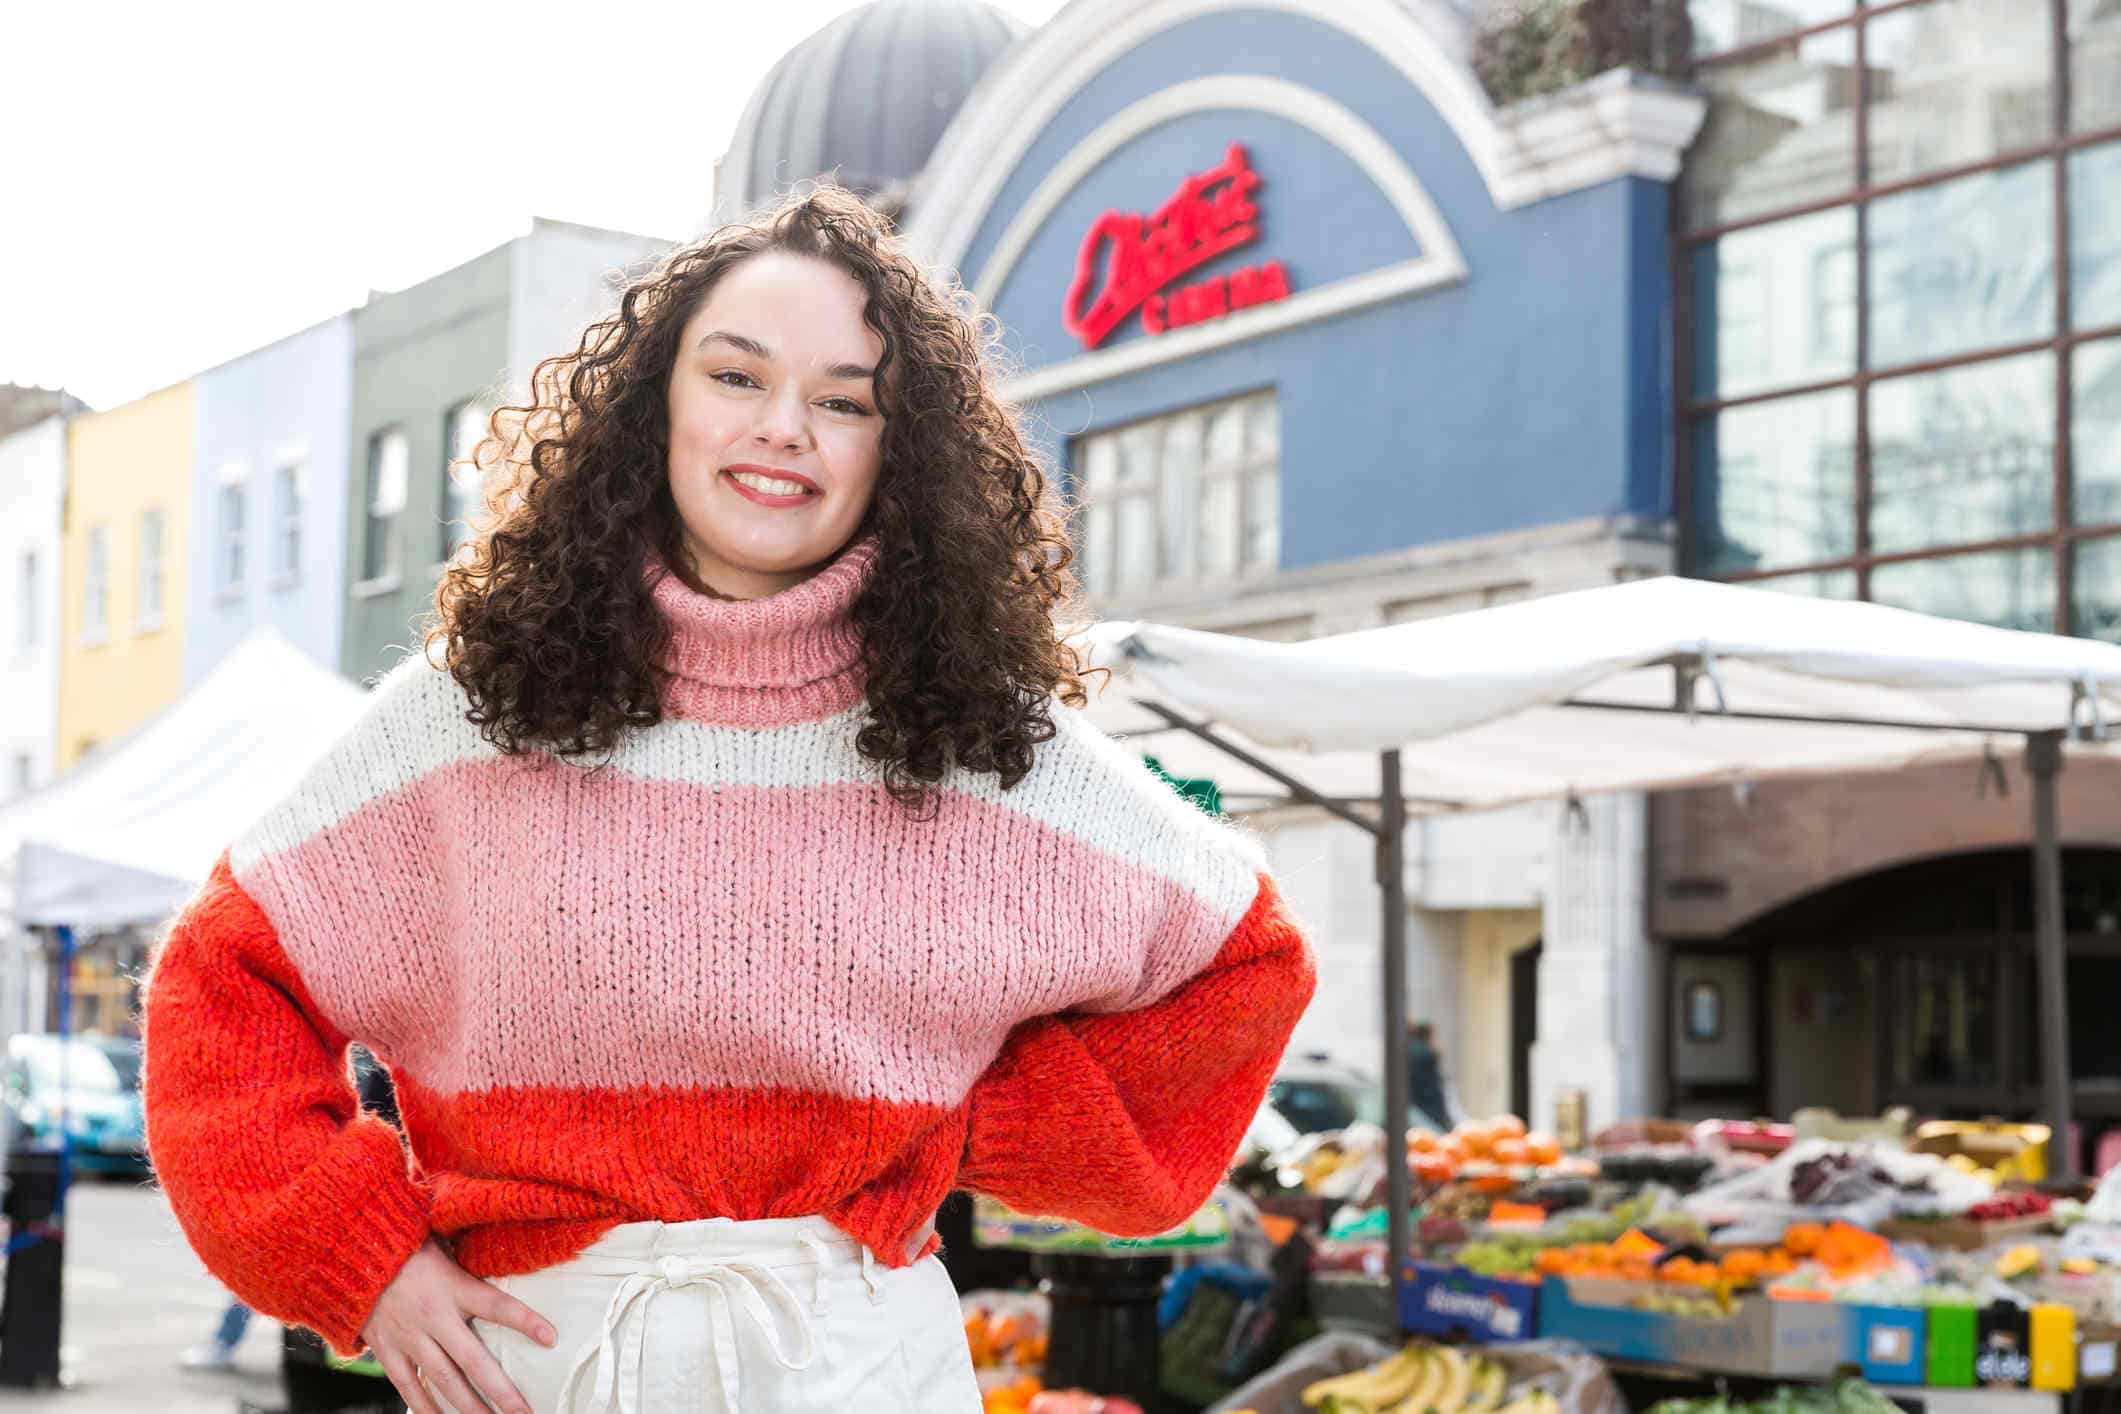 A woman is stood in front of a market with her hands on her hips, smiling. She has curly dark brown hair and is wearing a pink, red and white striped jumper.